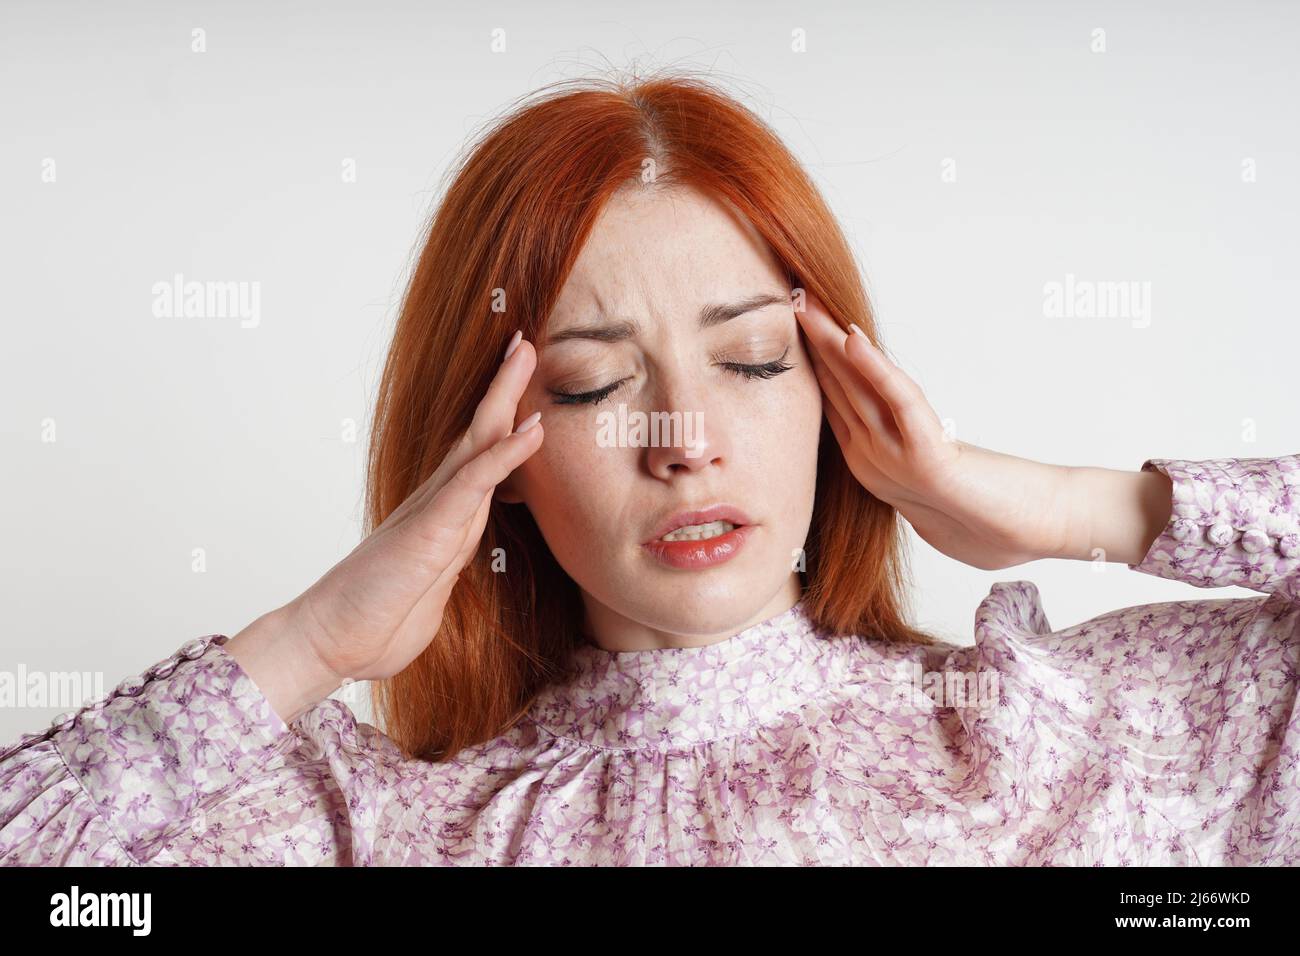 woman suffering from headache or migraine massaging her temples to relieve the pain Stock Photo